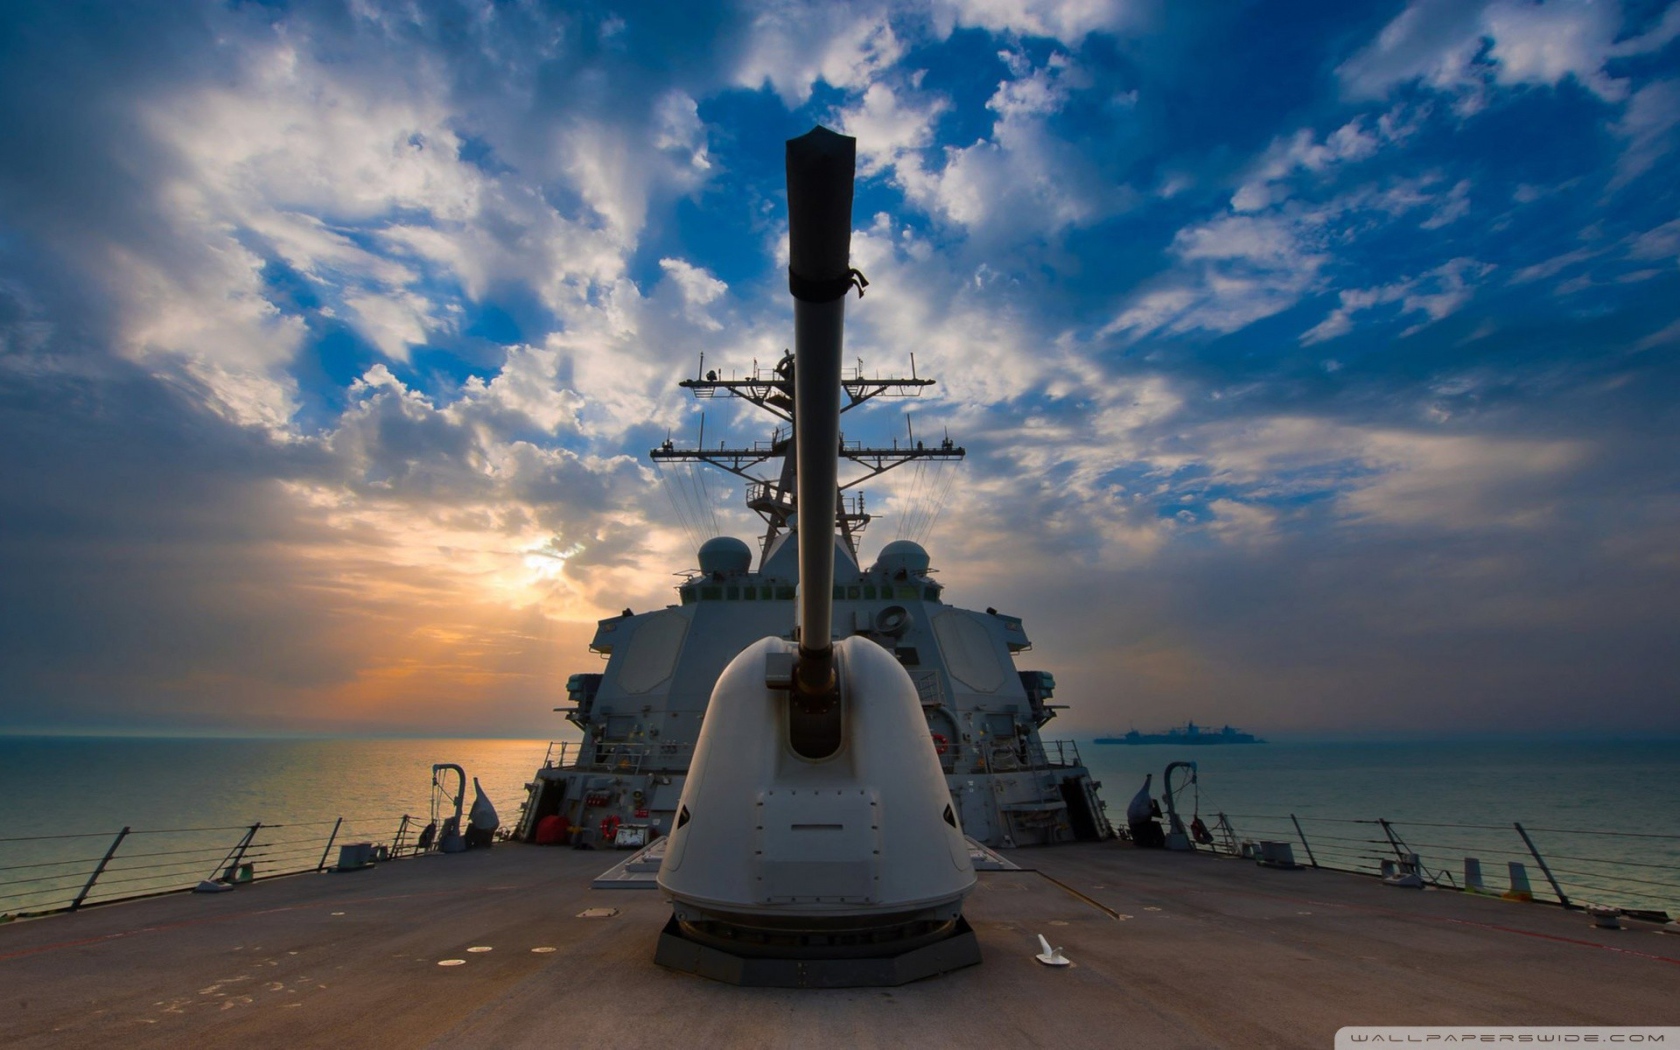 The cannon on the deck of a warship